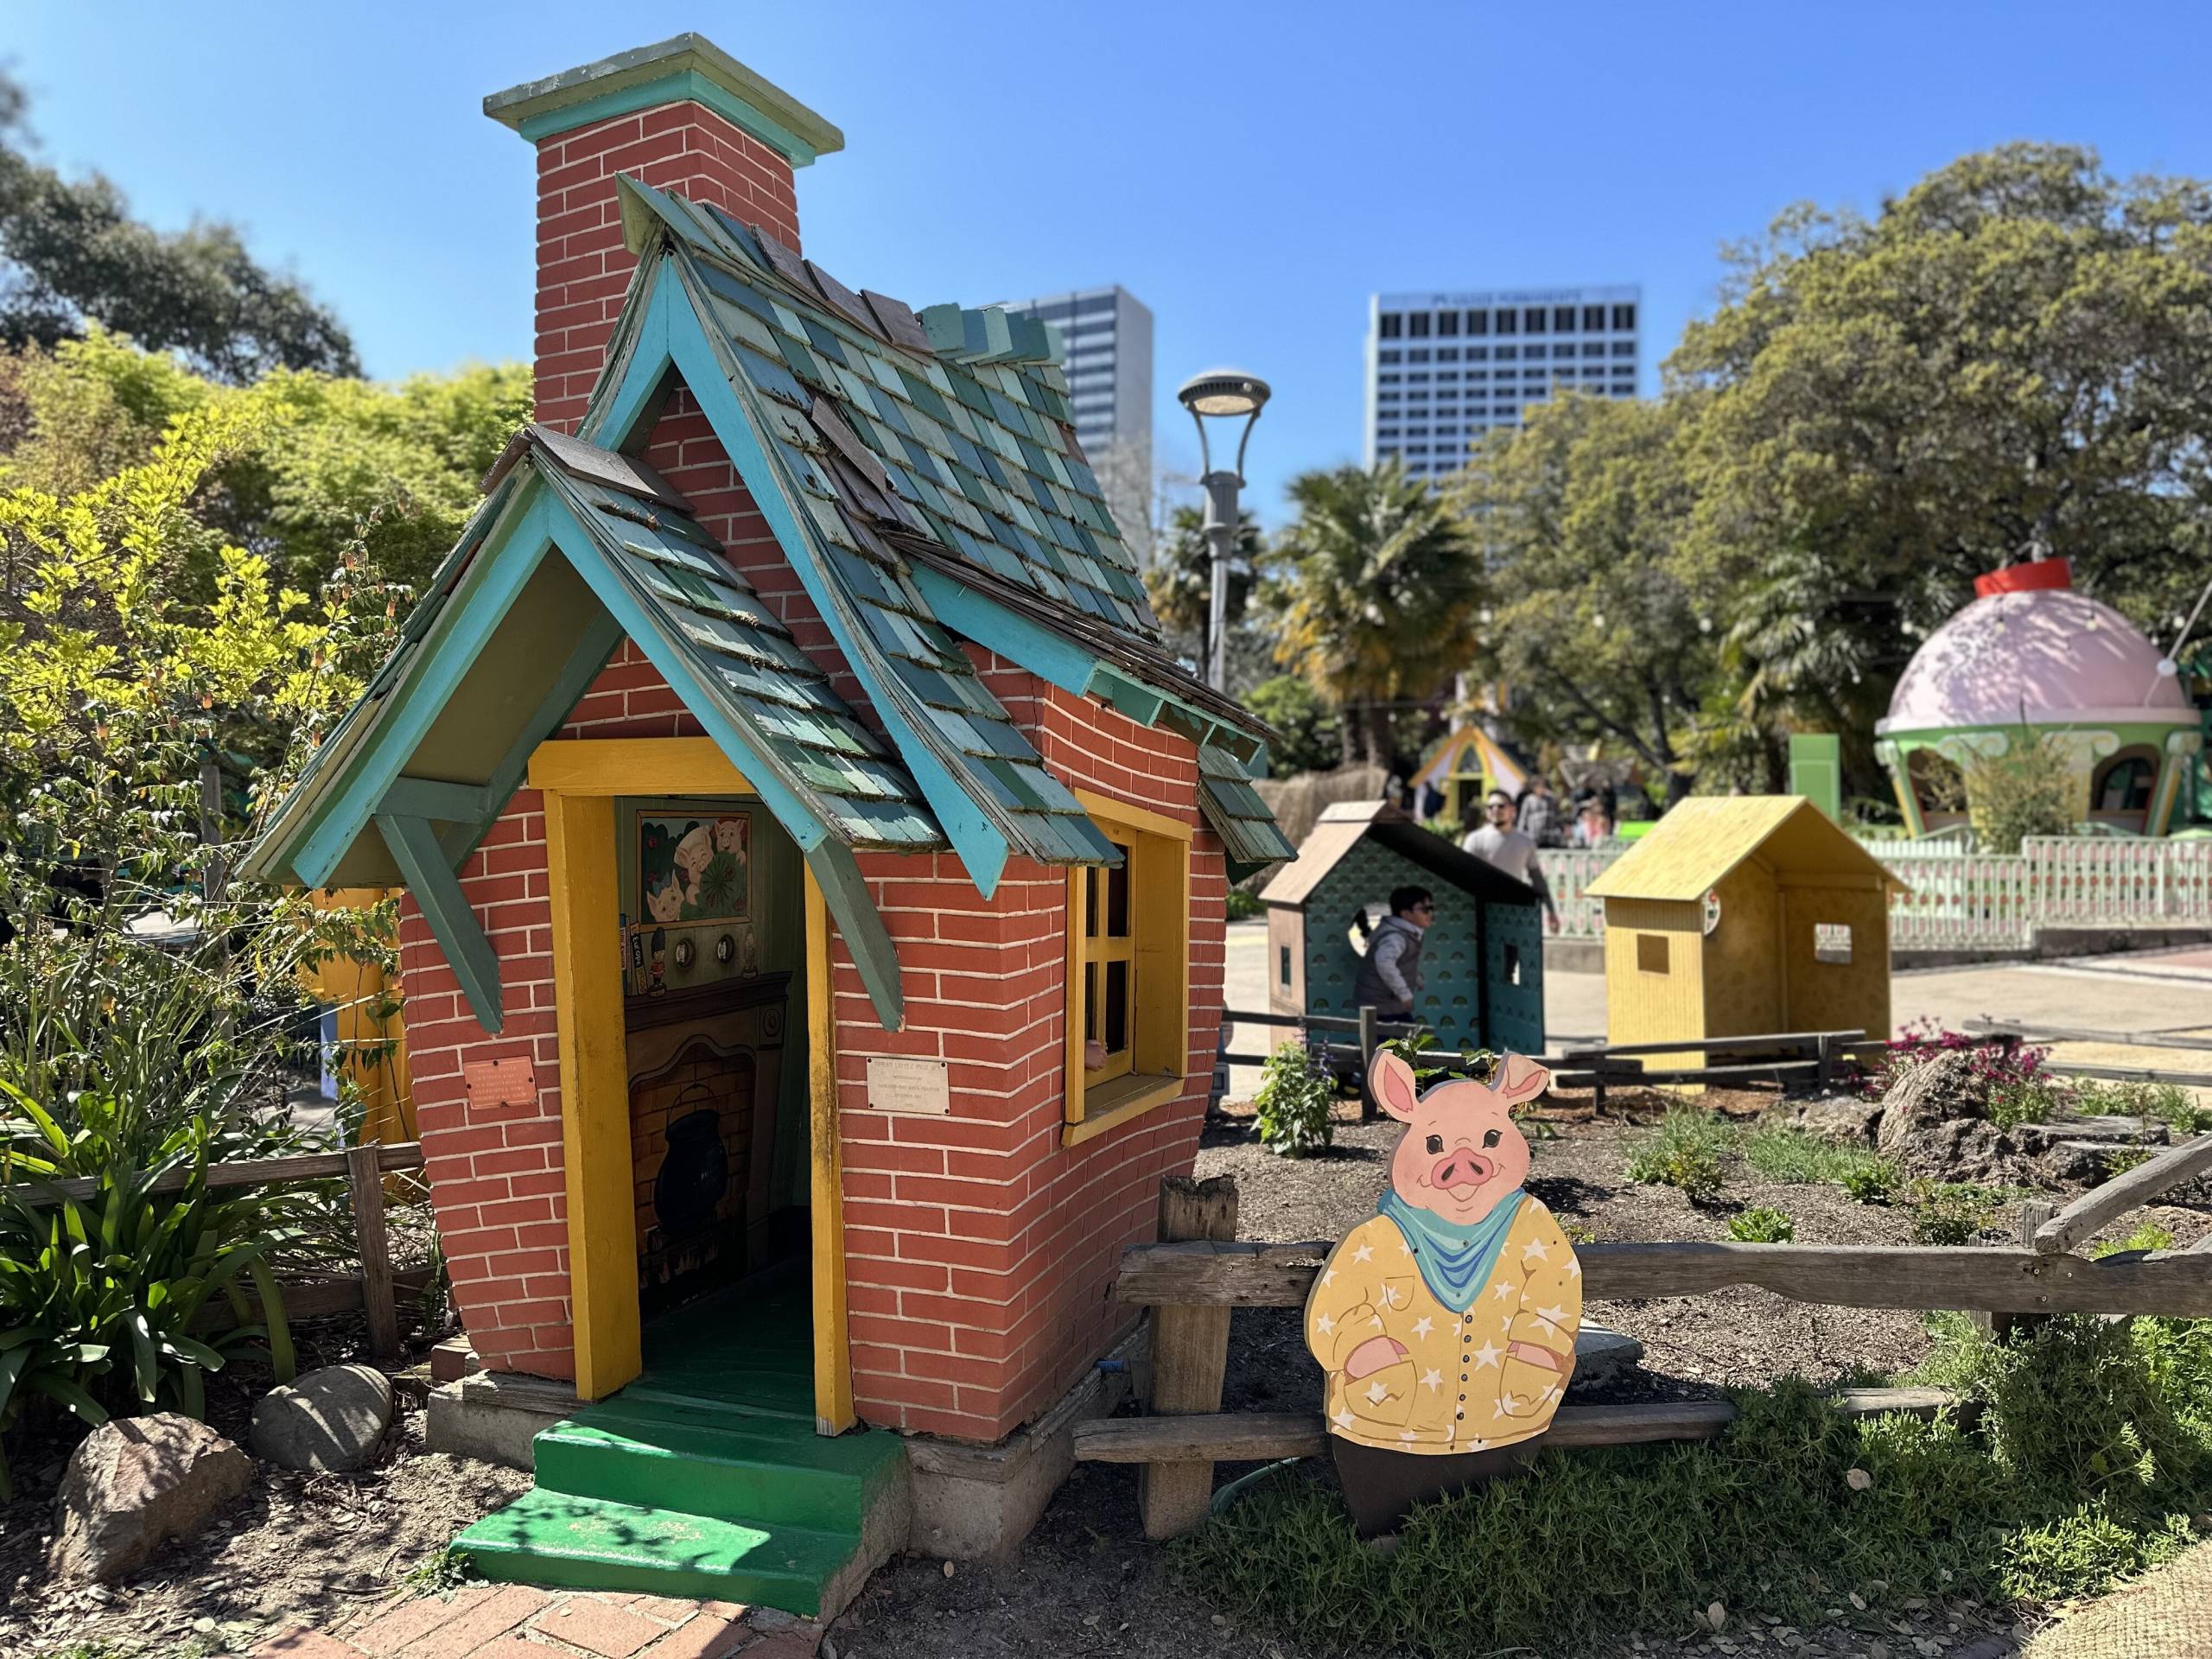 A three little piggies-themed play set, with a small brick house with a low doorway, and a cut-out cartoon pig next to it. A couple high-rise buildings in downtown Oakland are visible in the background.